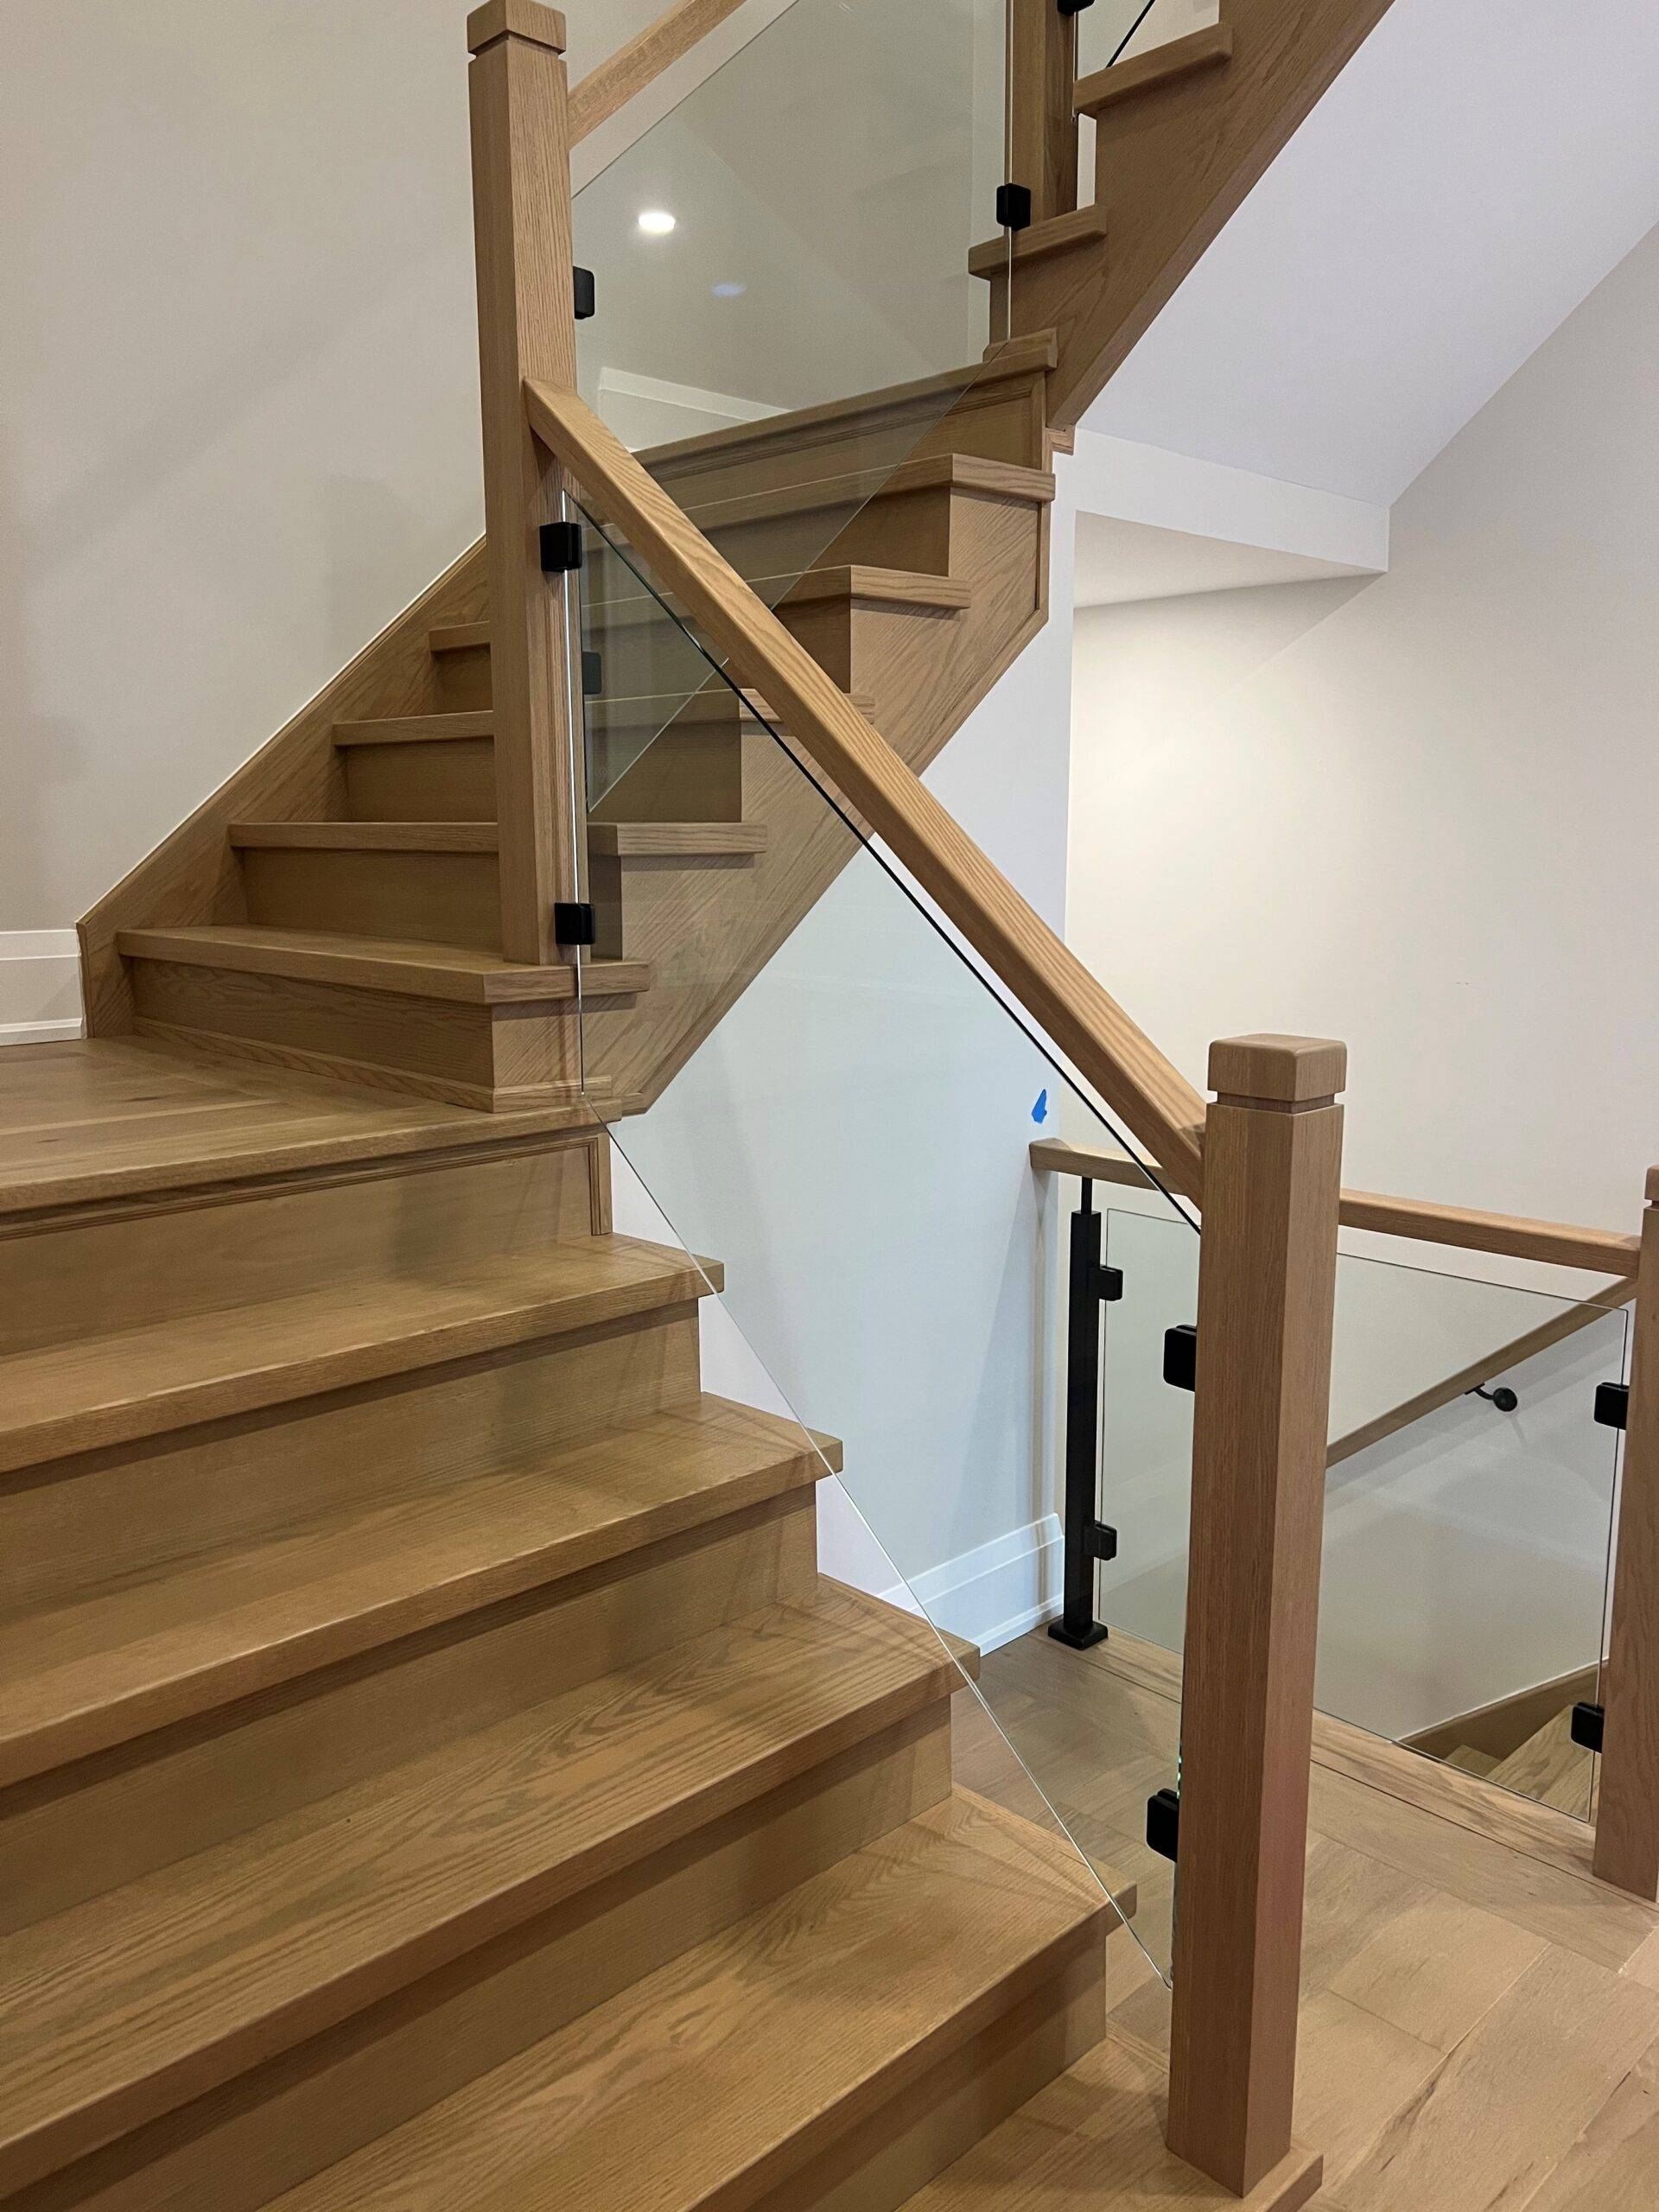 Bloor Railings in Oshawa are experts in stairs and railings for residential and commercial projects.